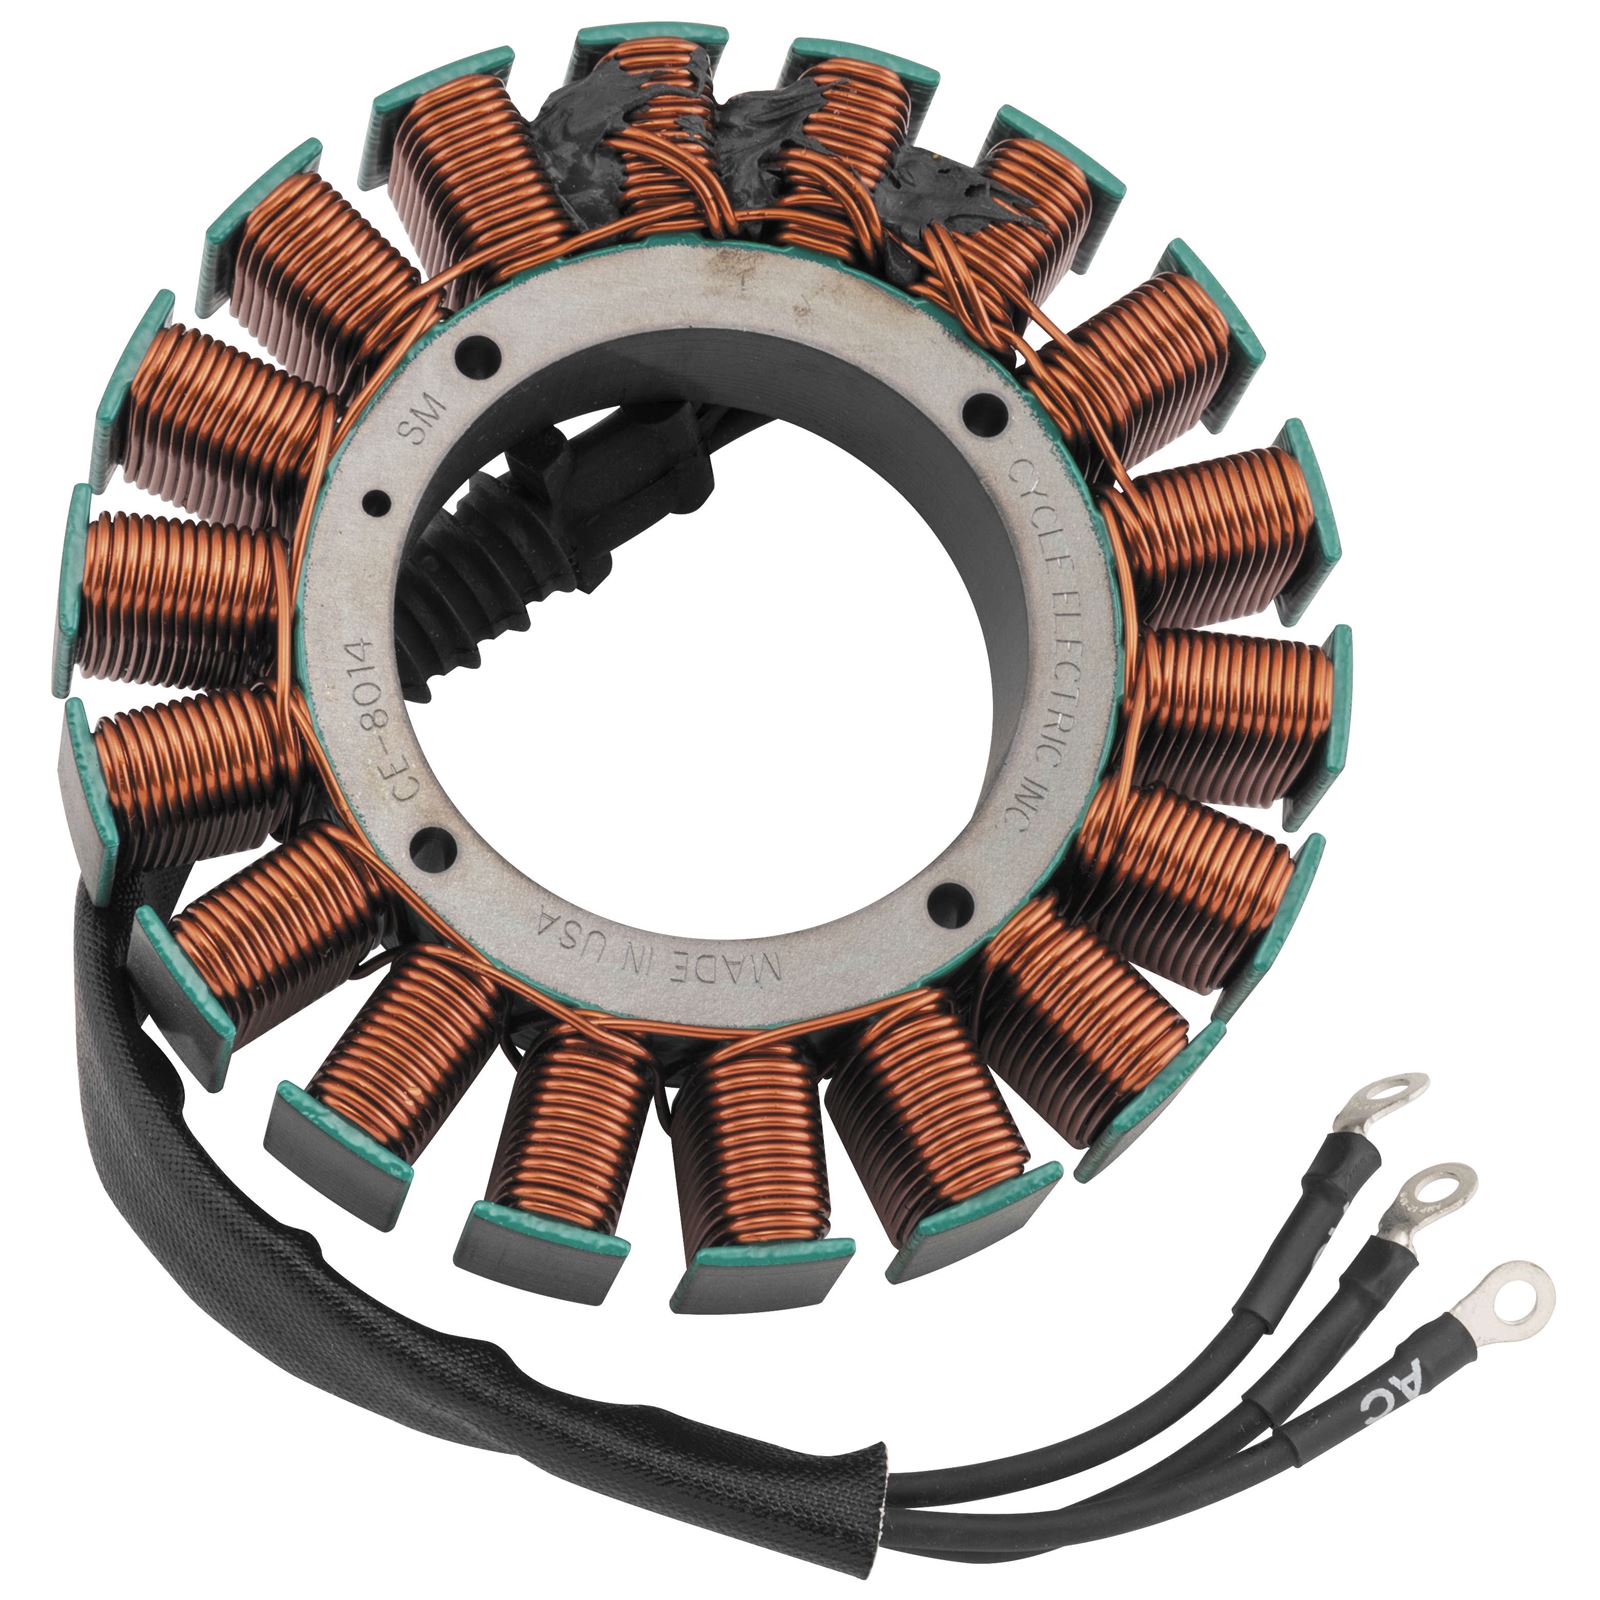 Cycle Electric 3-Phase 50A Charging Stator CE-8014 